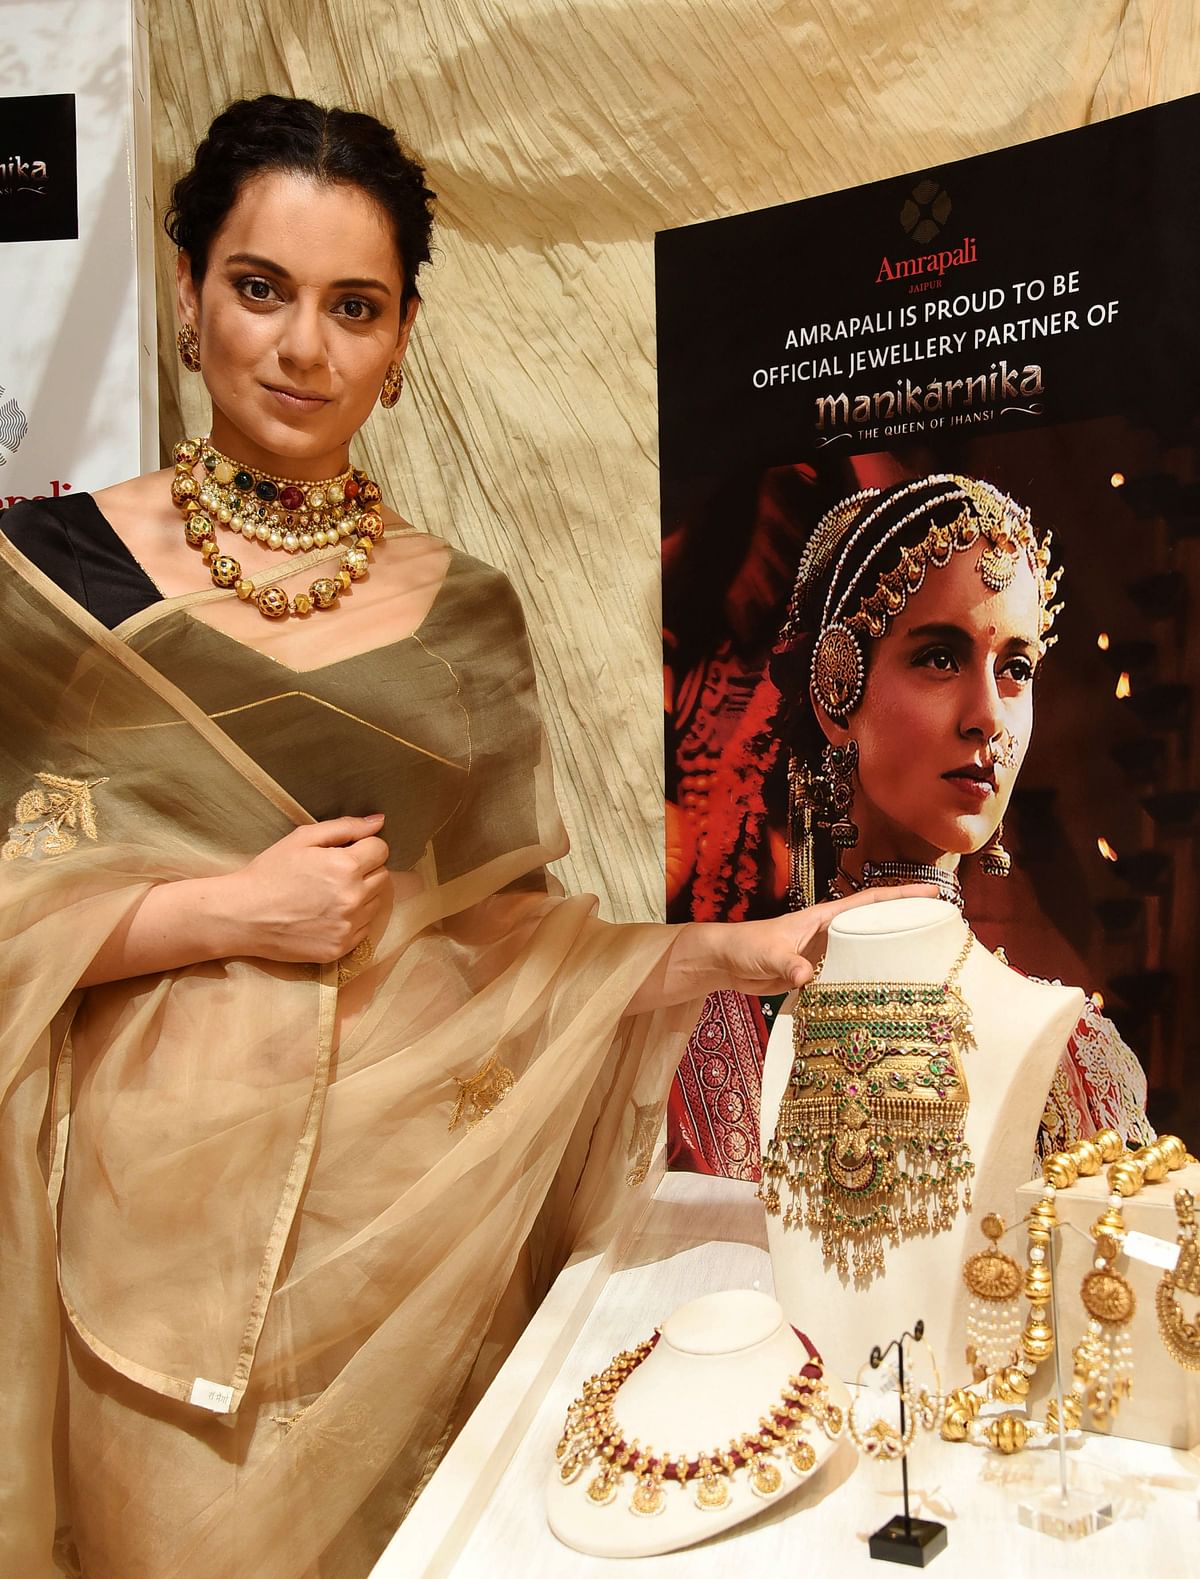 Indian Bollywood actress Kangana Ranaut takes part in a promotional event for the Hindi film ‘Manikarnika’ in Mumbai on 23 January 2019. Photo: AFP